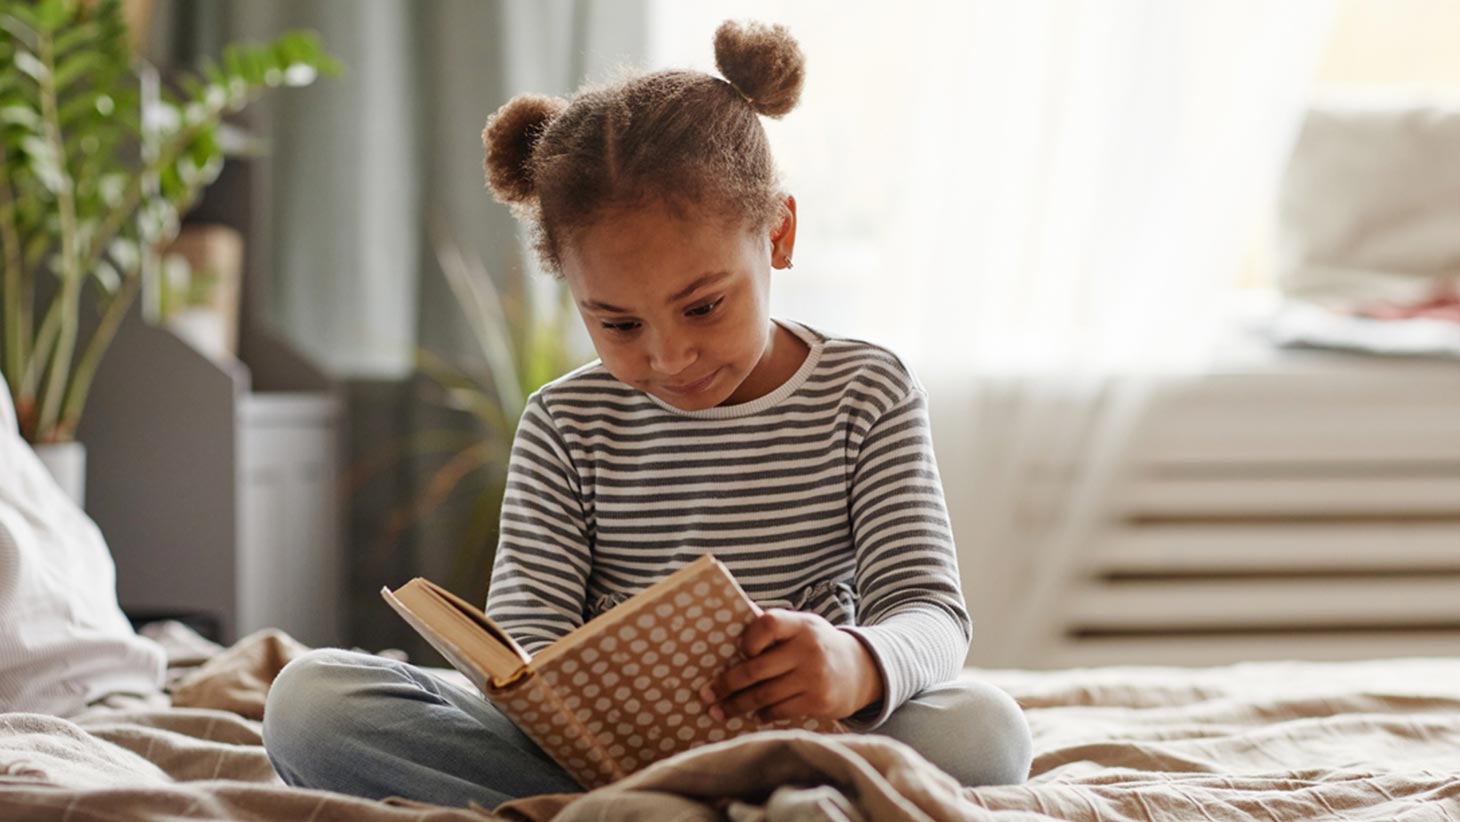 Portrait of cute young girl reading book while sitting on bed in a cozy room.